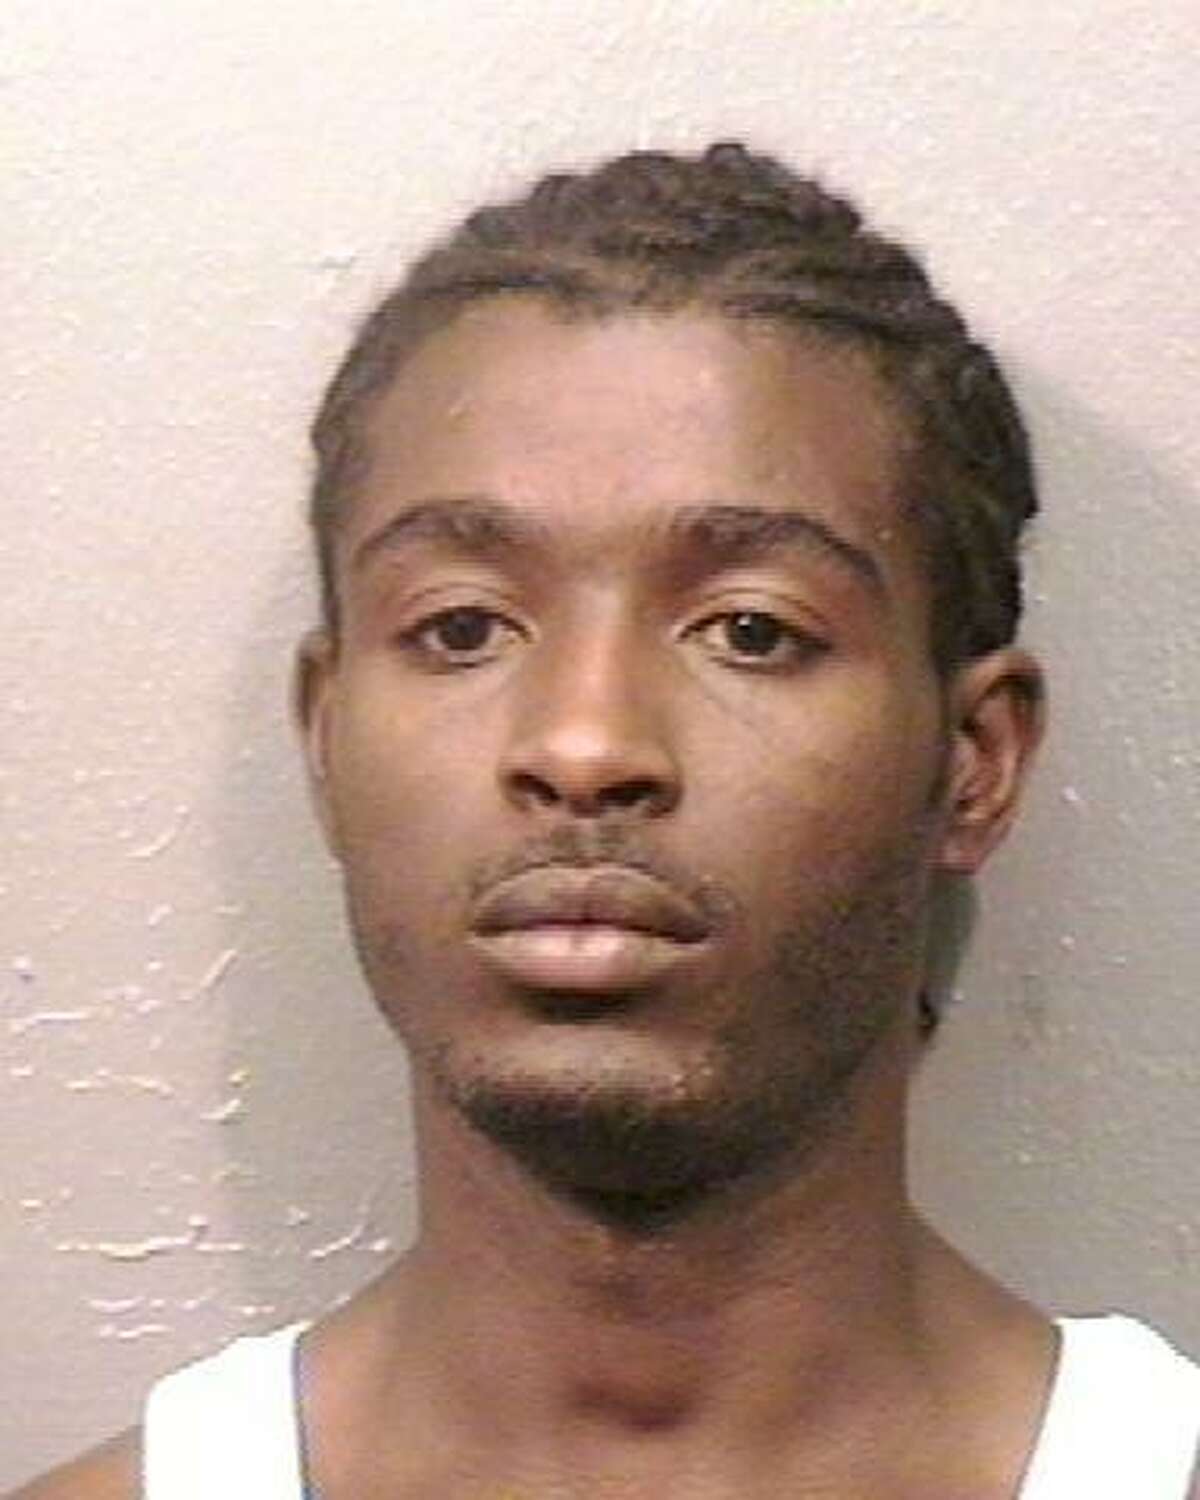 Jessie Johnson is wanted by the Harris County Sheriff's Office on a charge of aggravated sexual assault of a child.